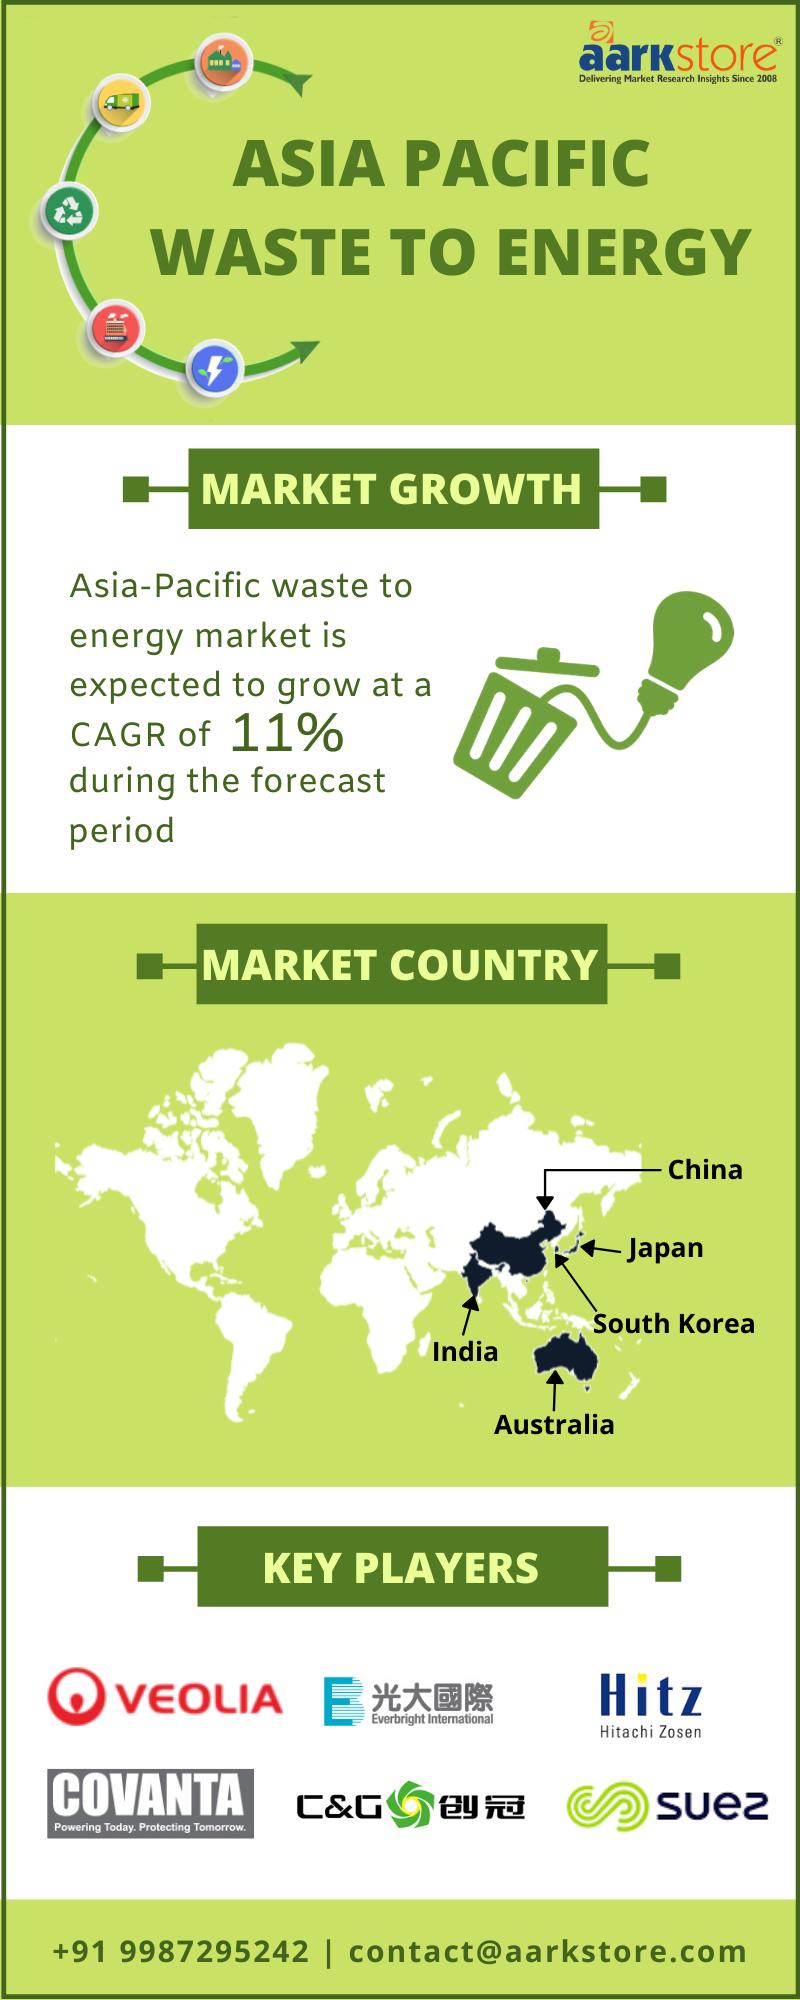 Asia Pacific Waste To Energy Market 2019 | Major Key Stakeholders and Industry Strategies